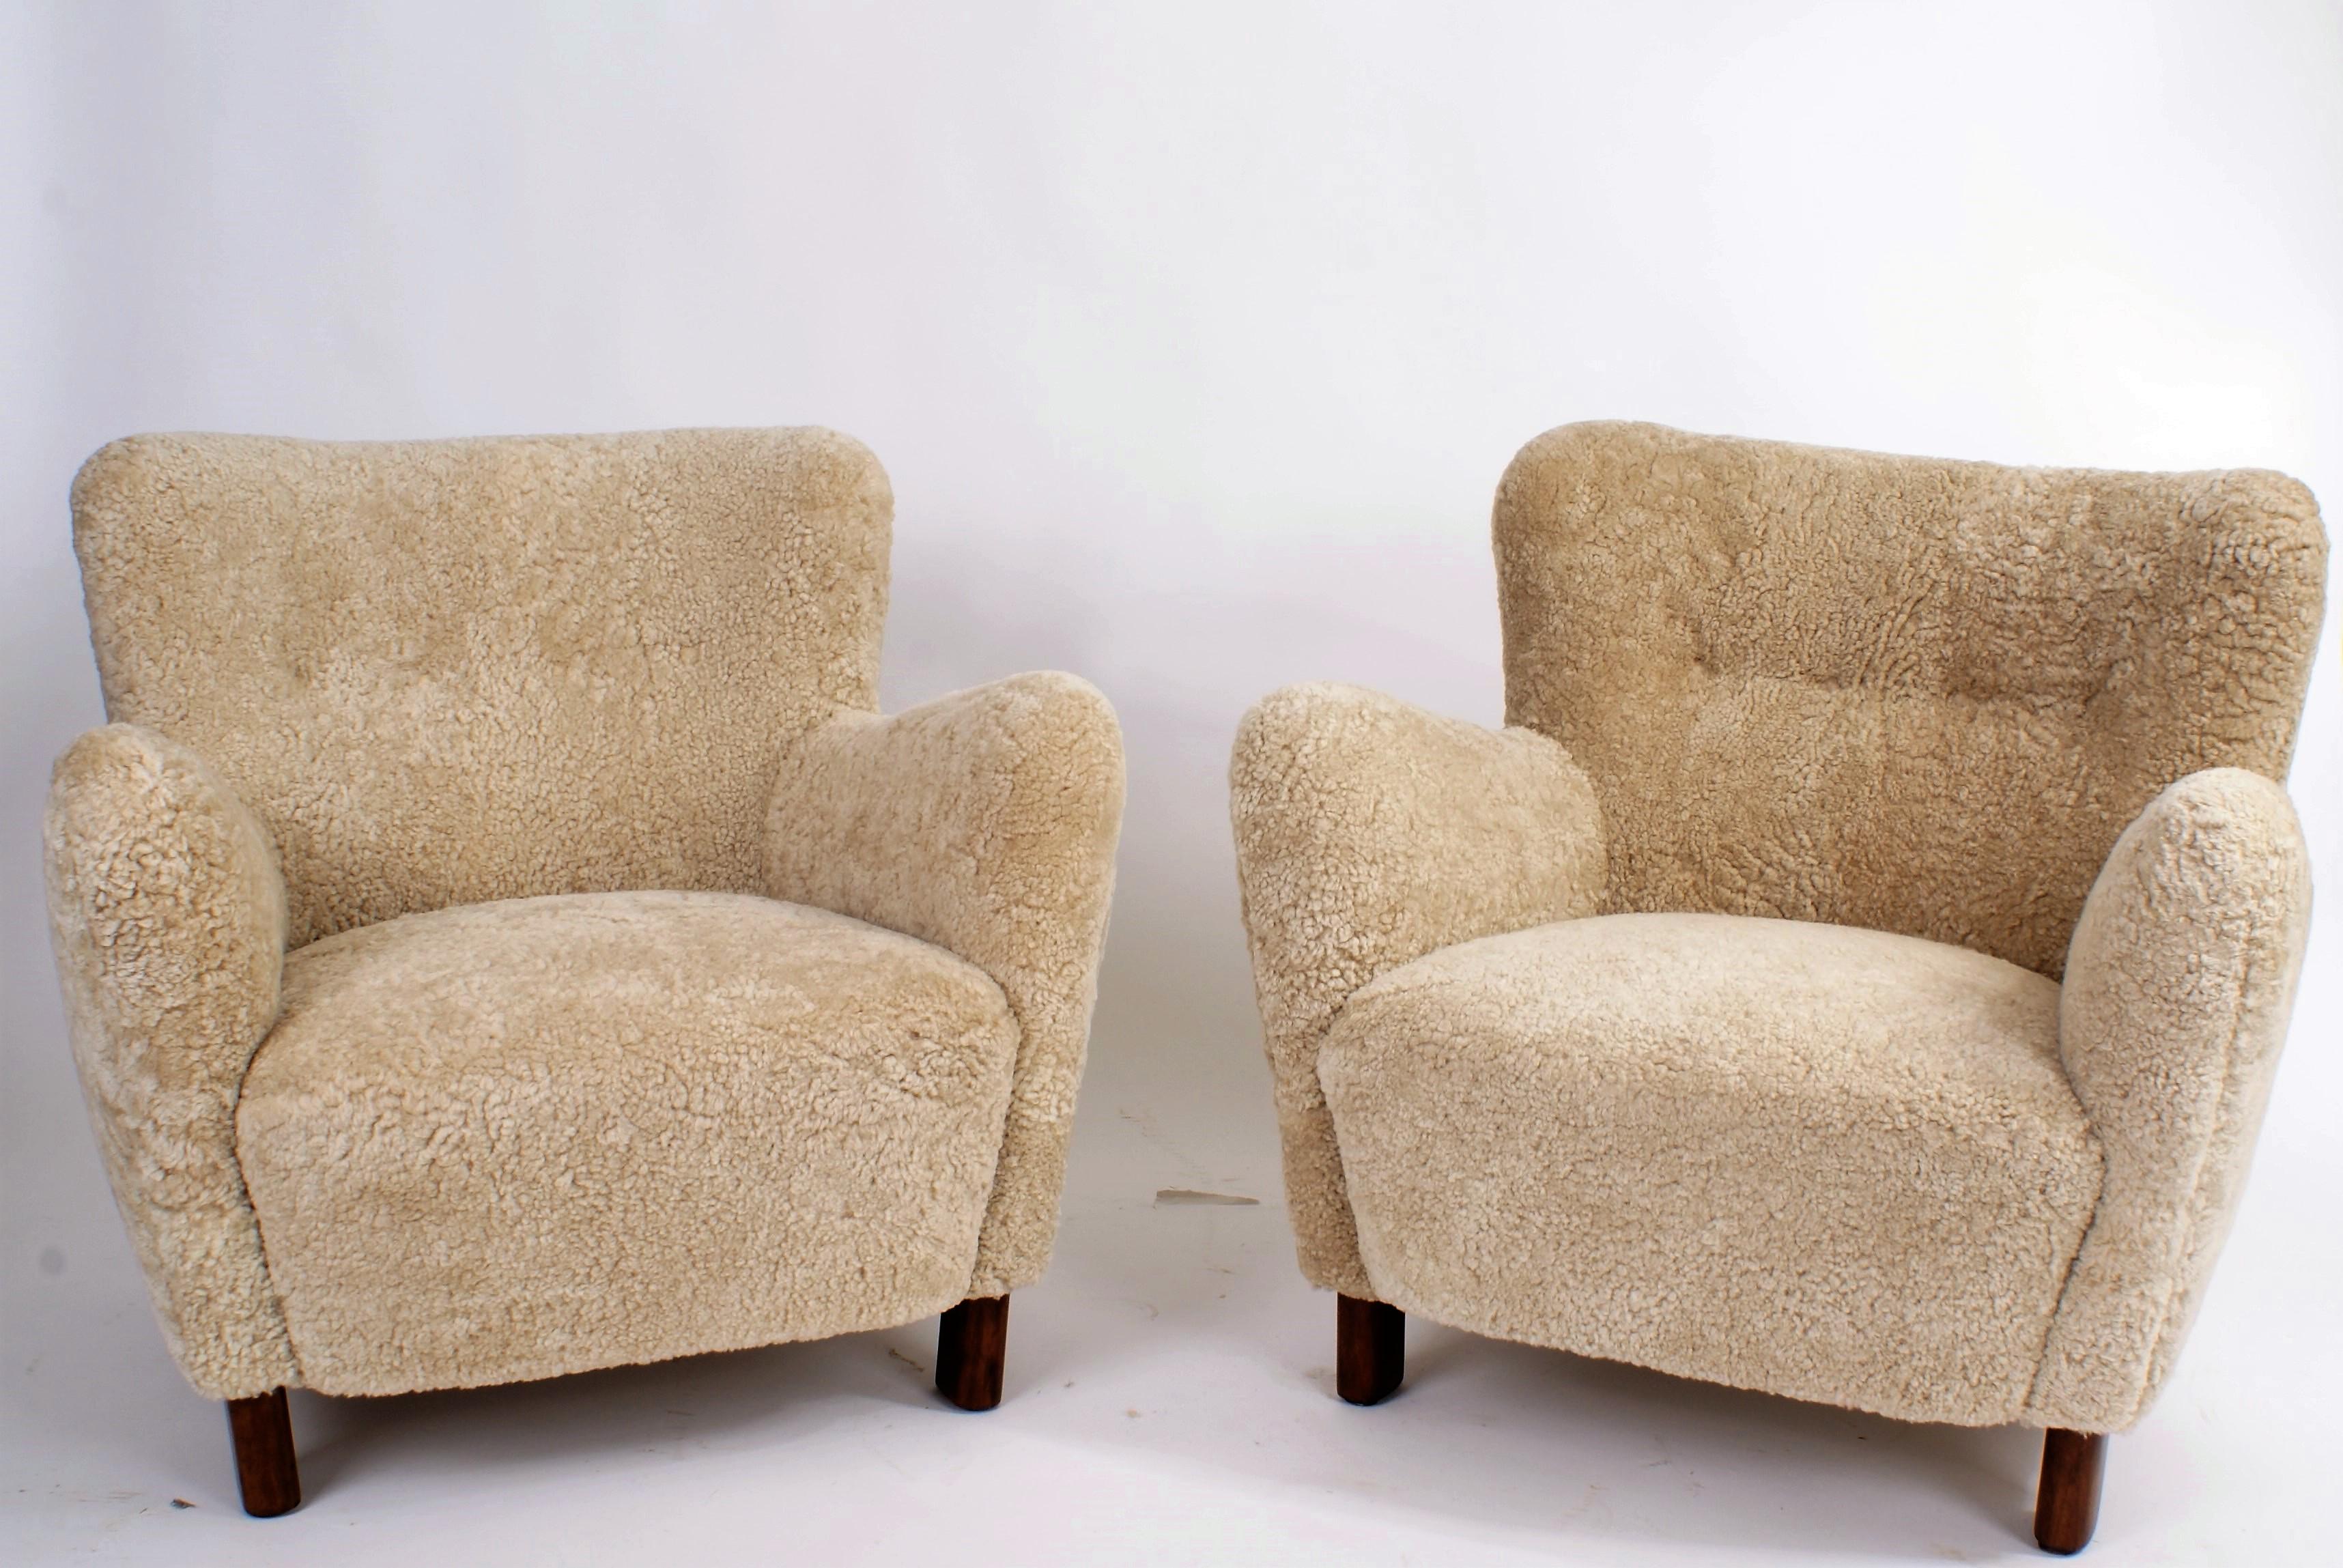 Pair of Fritz Hansen easy chairs, model 1669, circa 1930s.

Sculptural chair upholstered in sheepskin, legs of stained beech. All work carried out as original with filling in organic materials and bottom finish with nails.

Price is for the pair